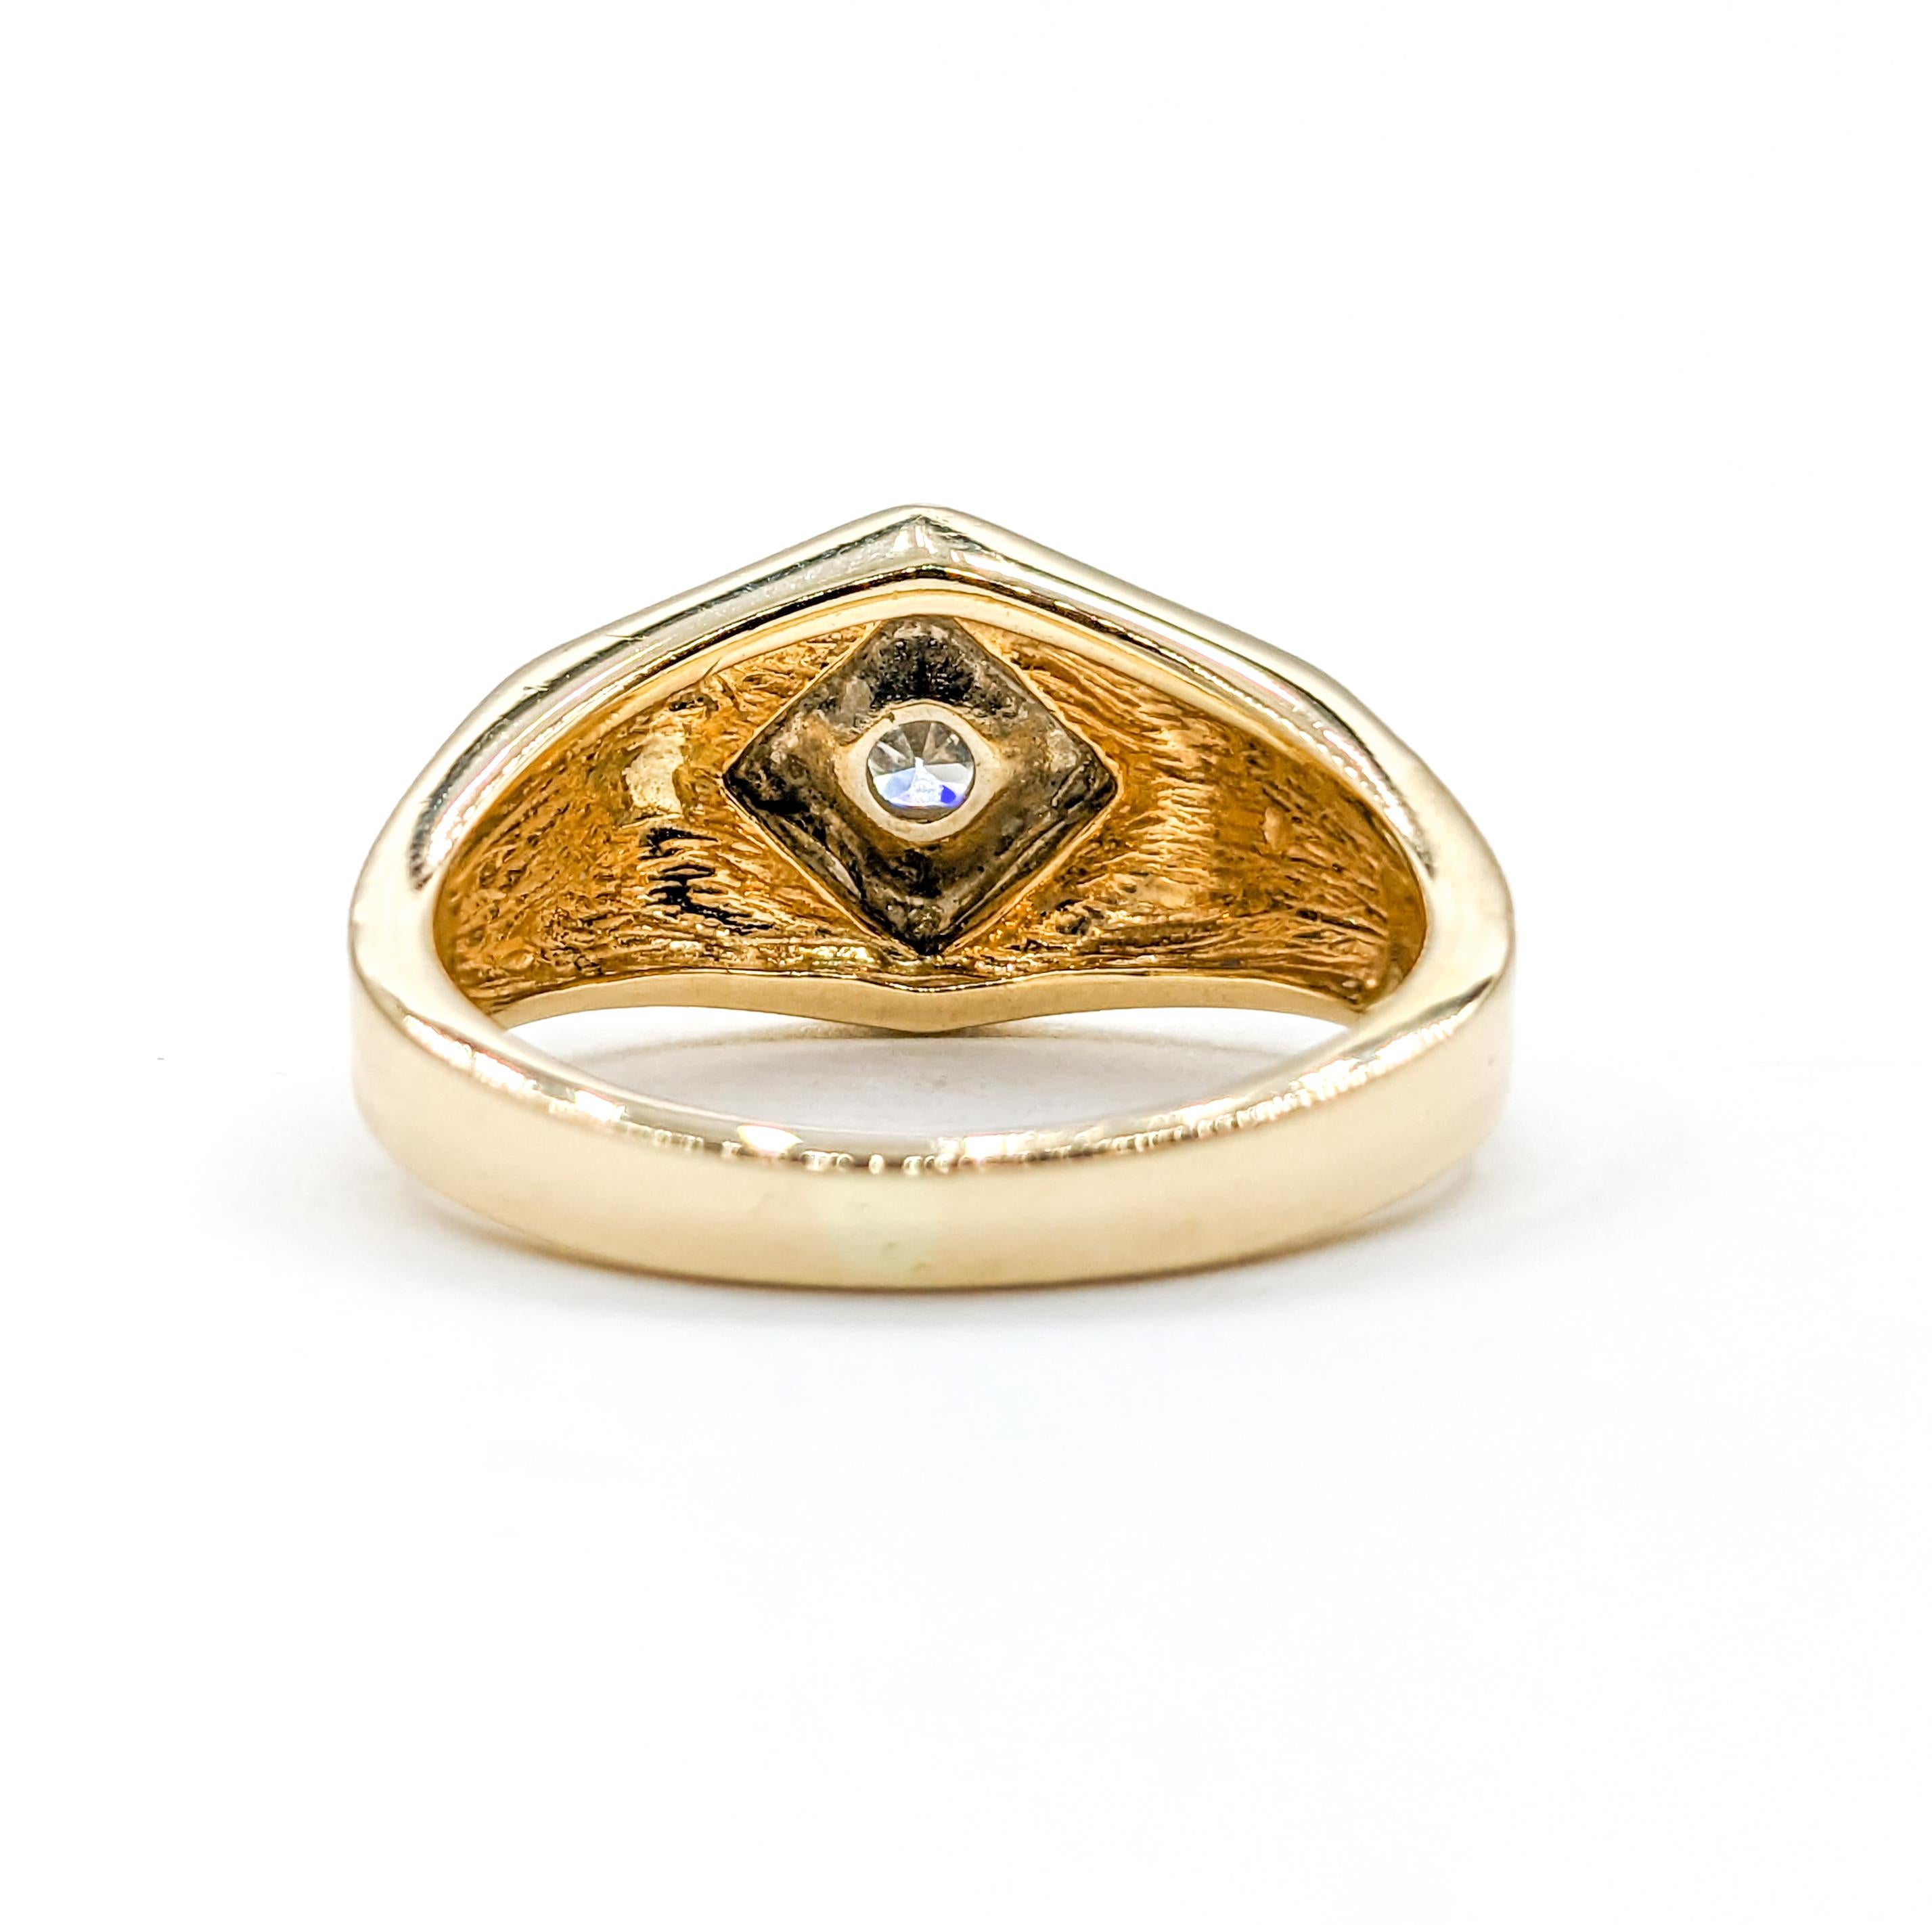 Vintage Old European Cut Diamond Men's Ring in Gold In Excellent Condition For Sale In Bloomington, MN